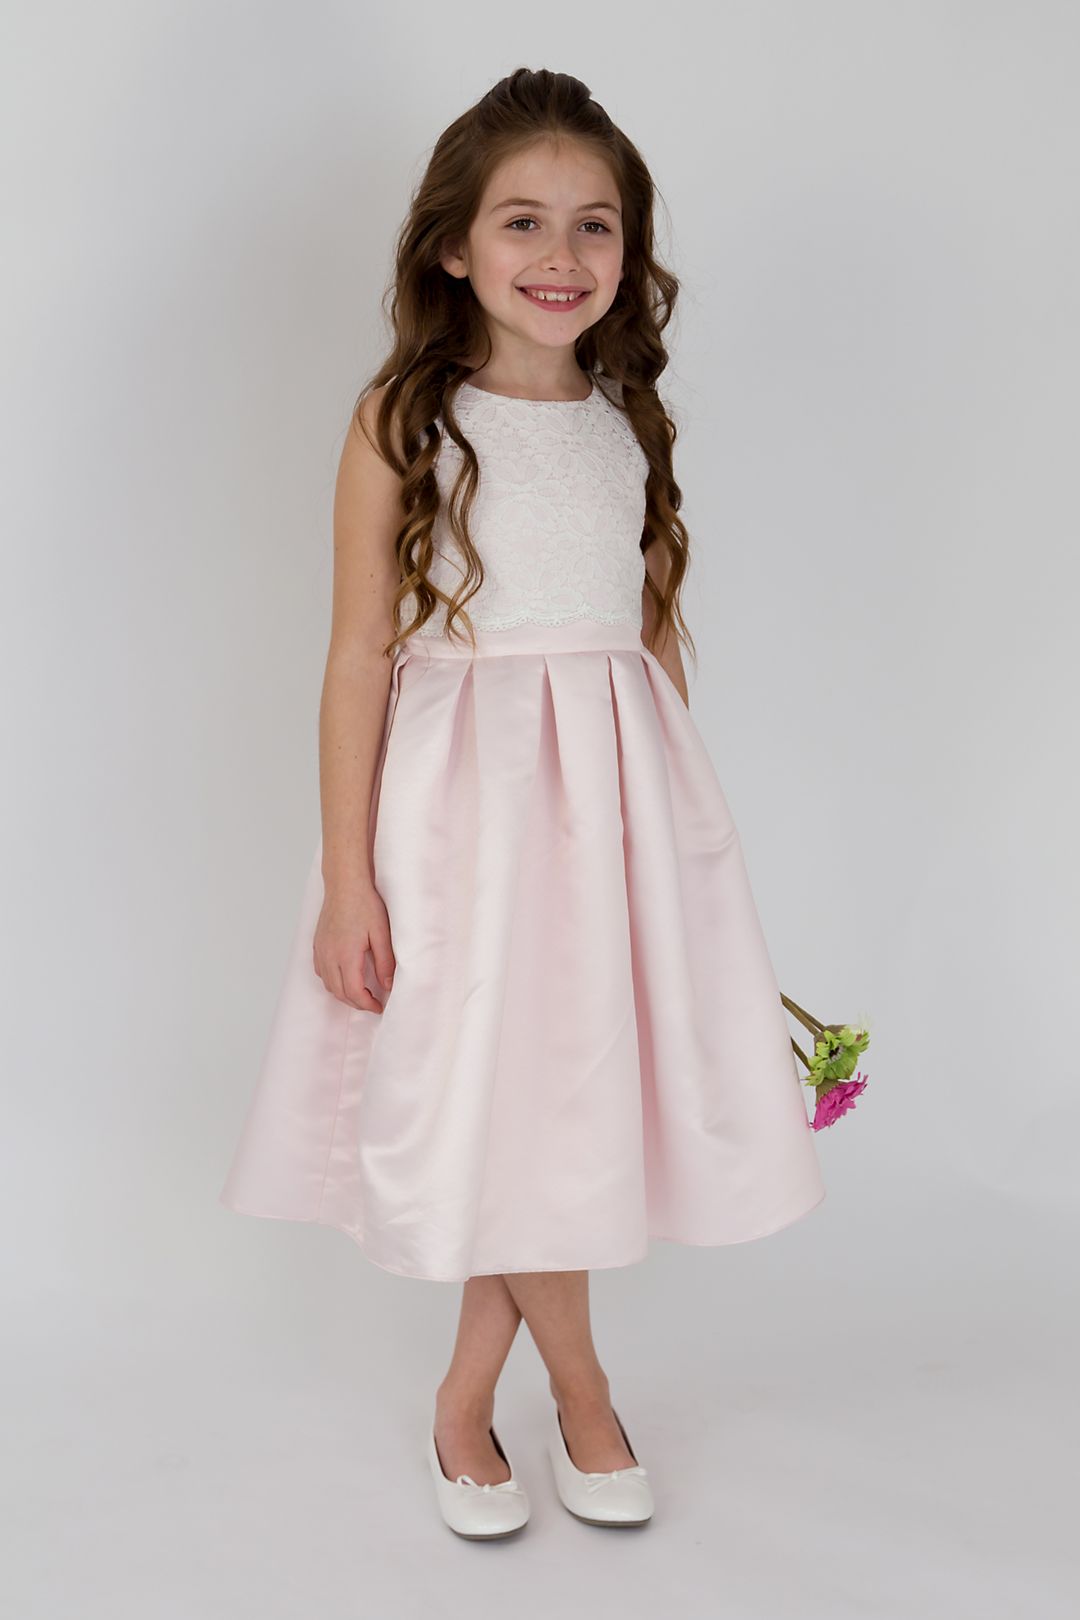 Scalloped Lace and Satin Flower Girl Dress | David's Bridal